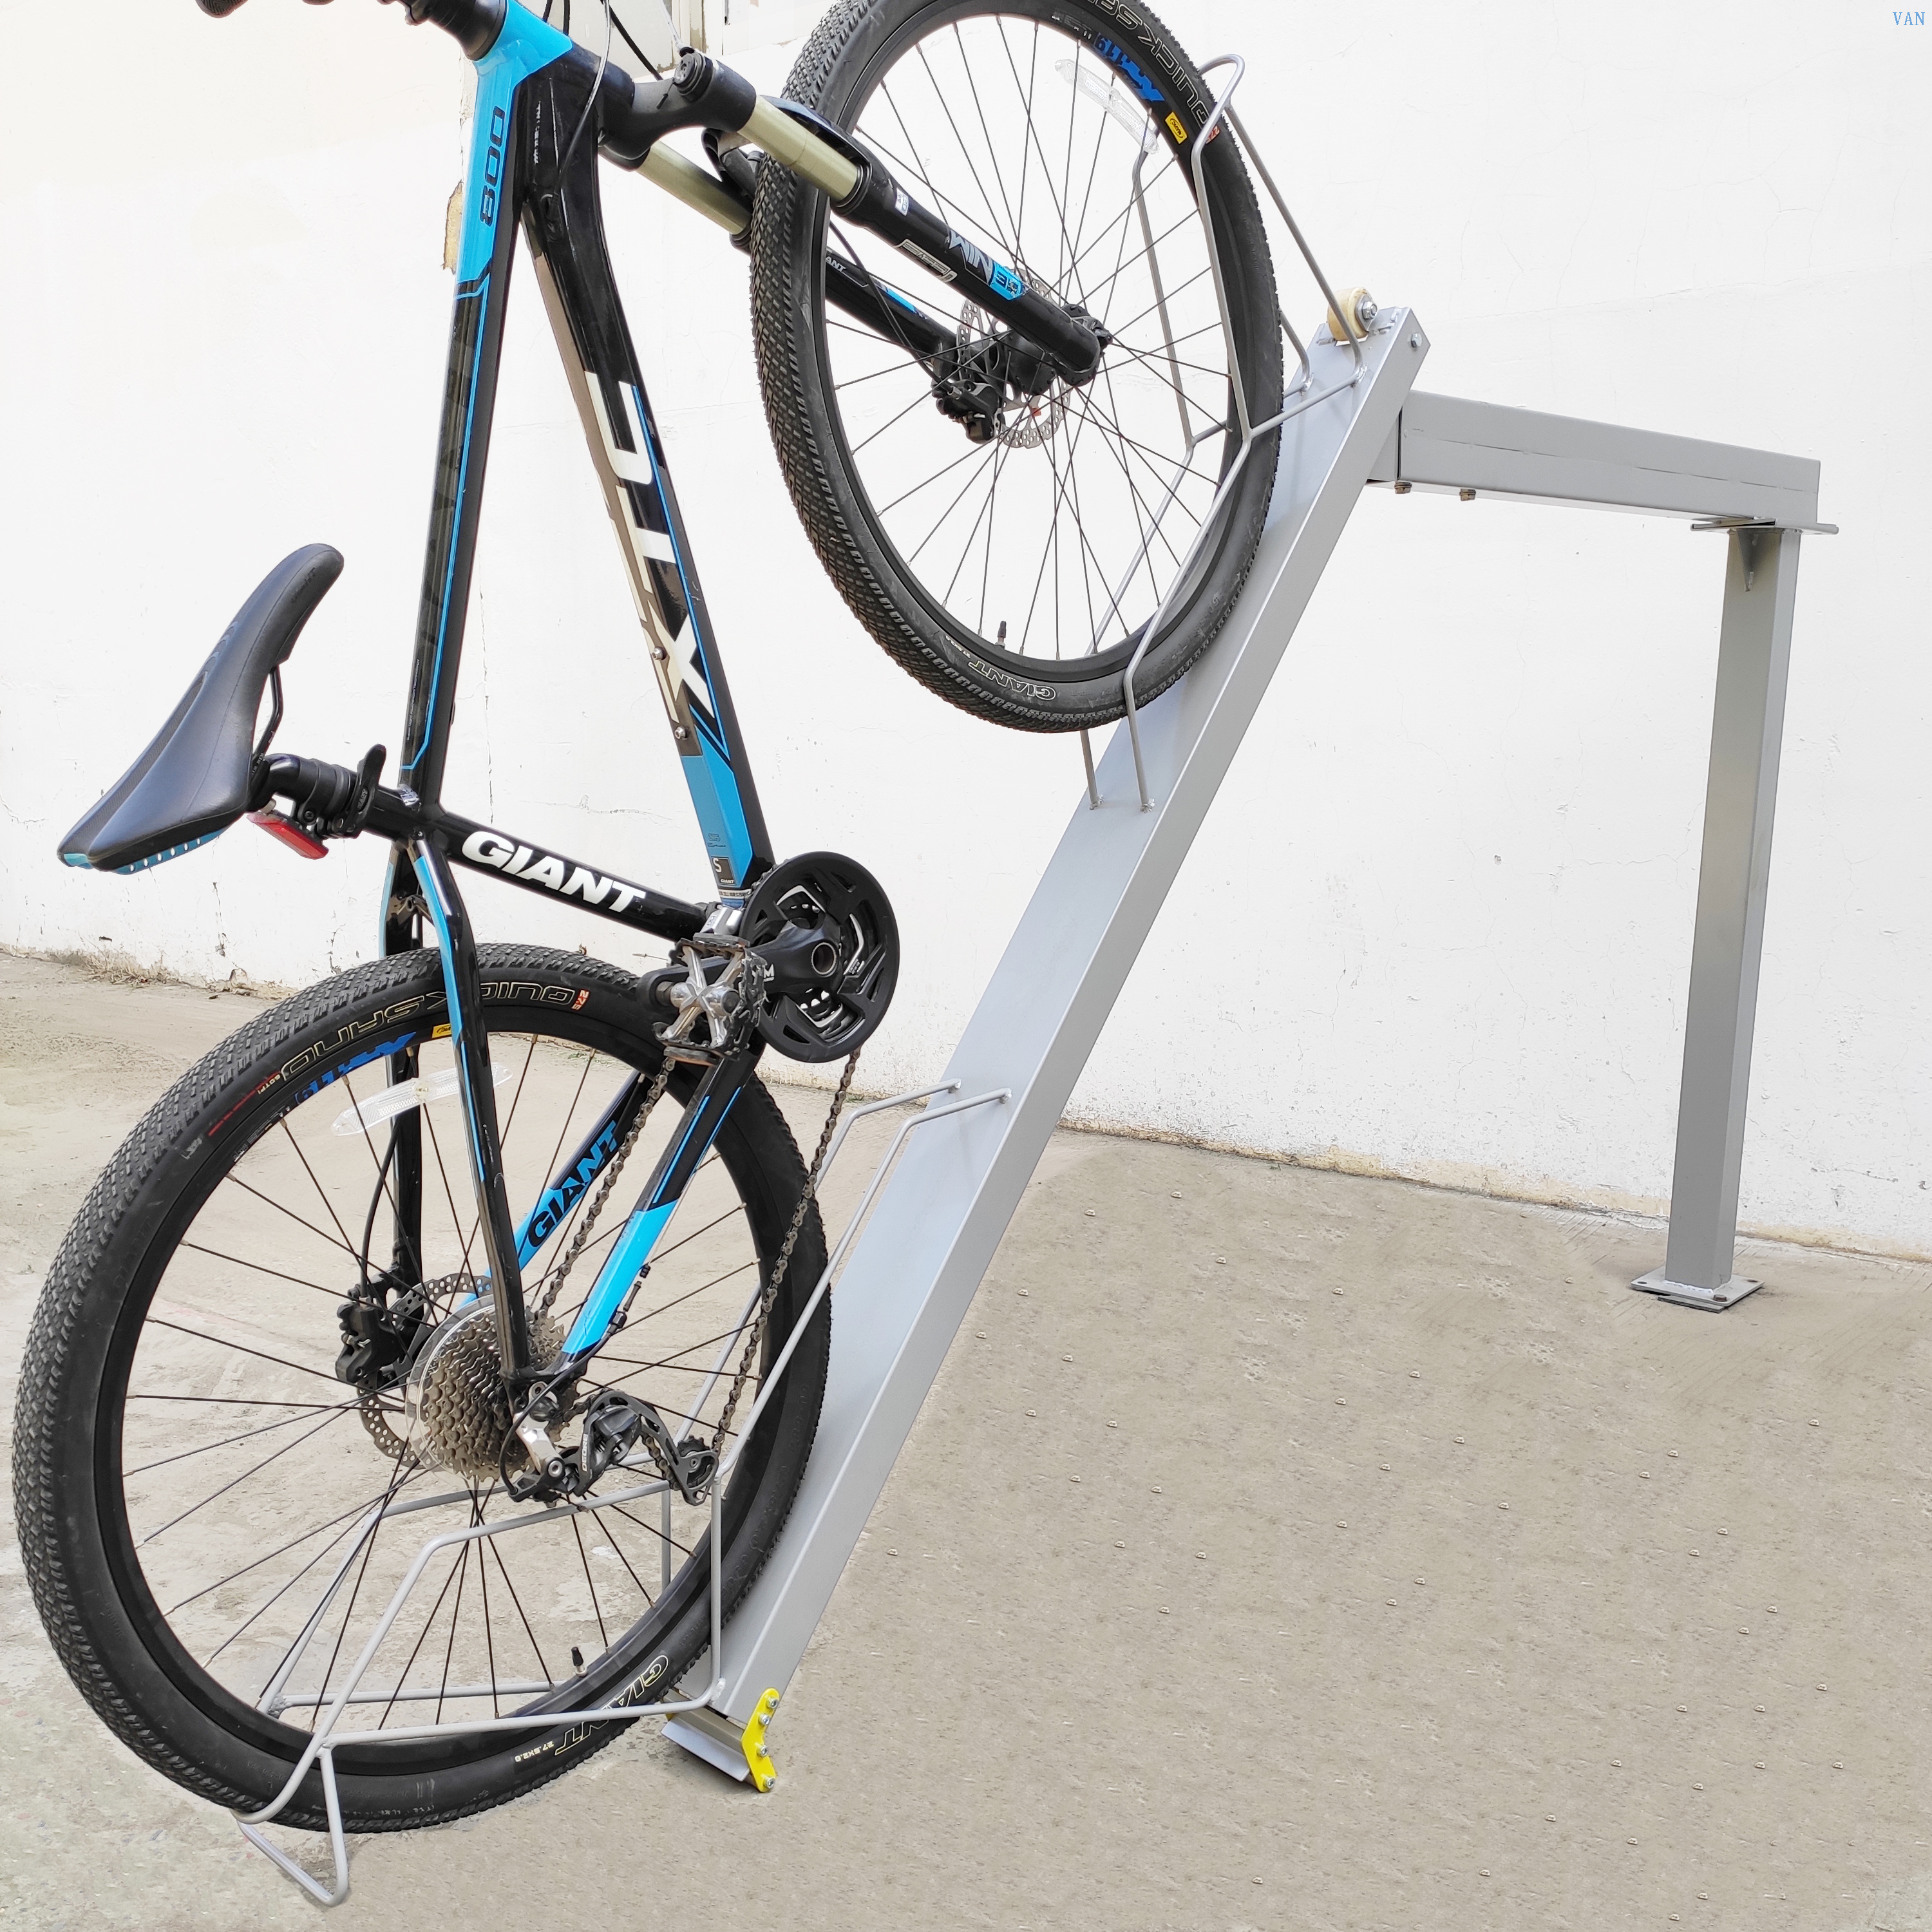 China Manufacturer Powder Coating Cycle Rack Double Decker Bike Rack for Sale